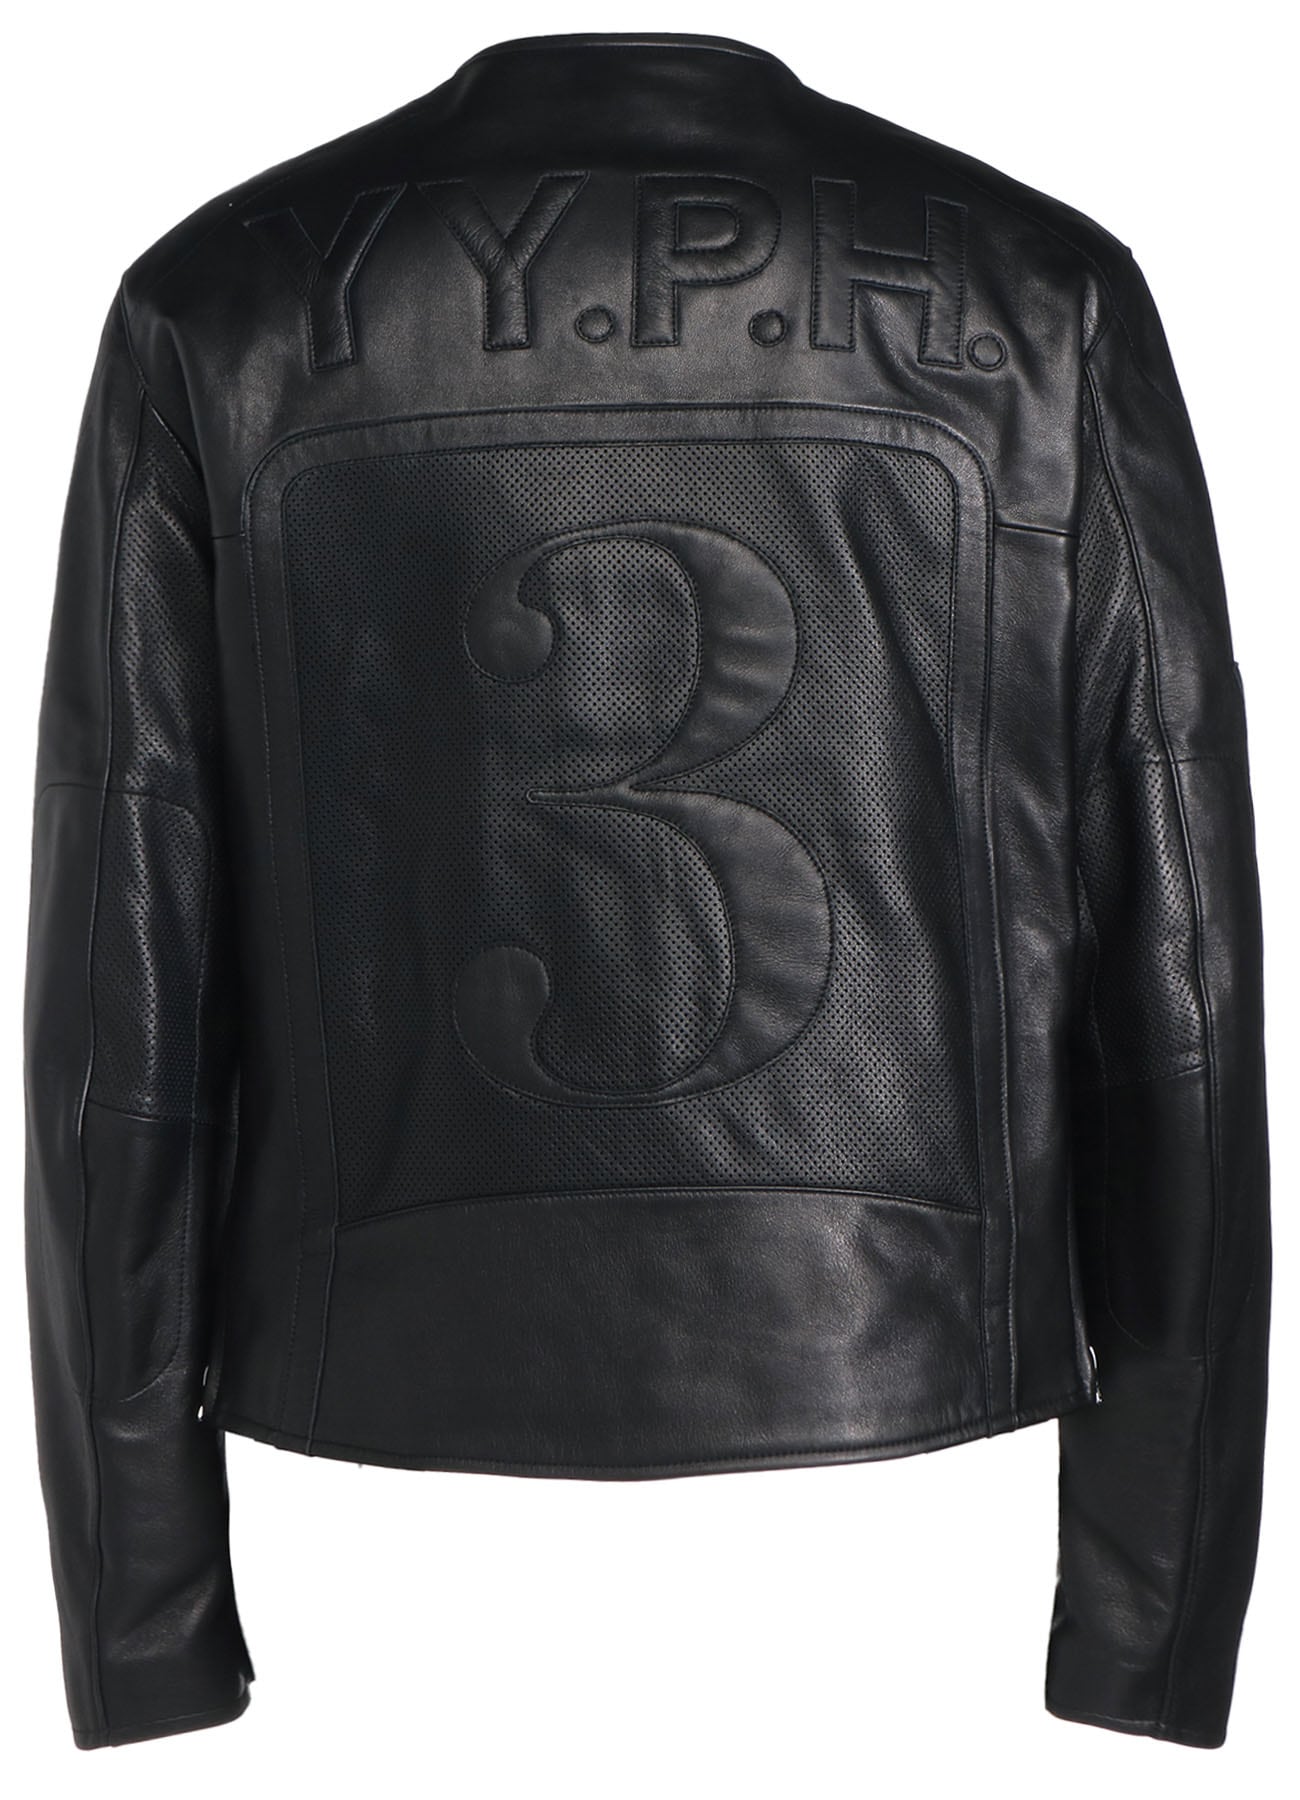 SEMI-VEGETABLE TANNED SHEEP LEATHER COLLARLESS MOTORCYCLE JACKET